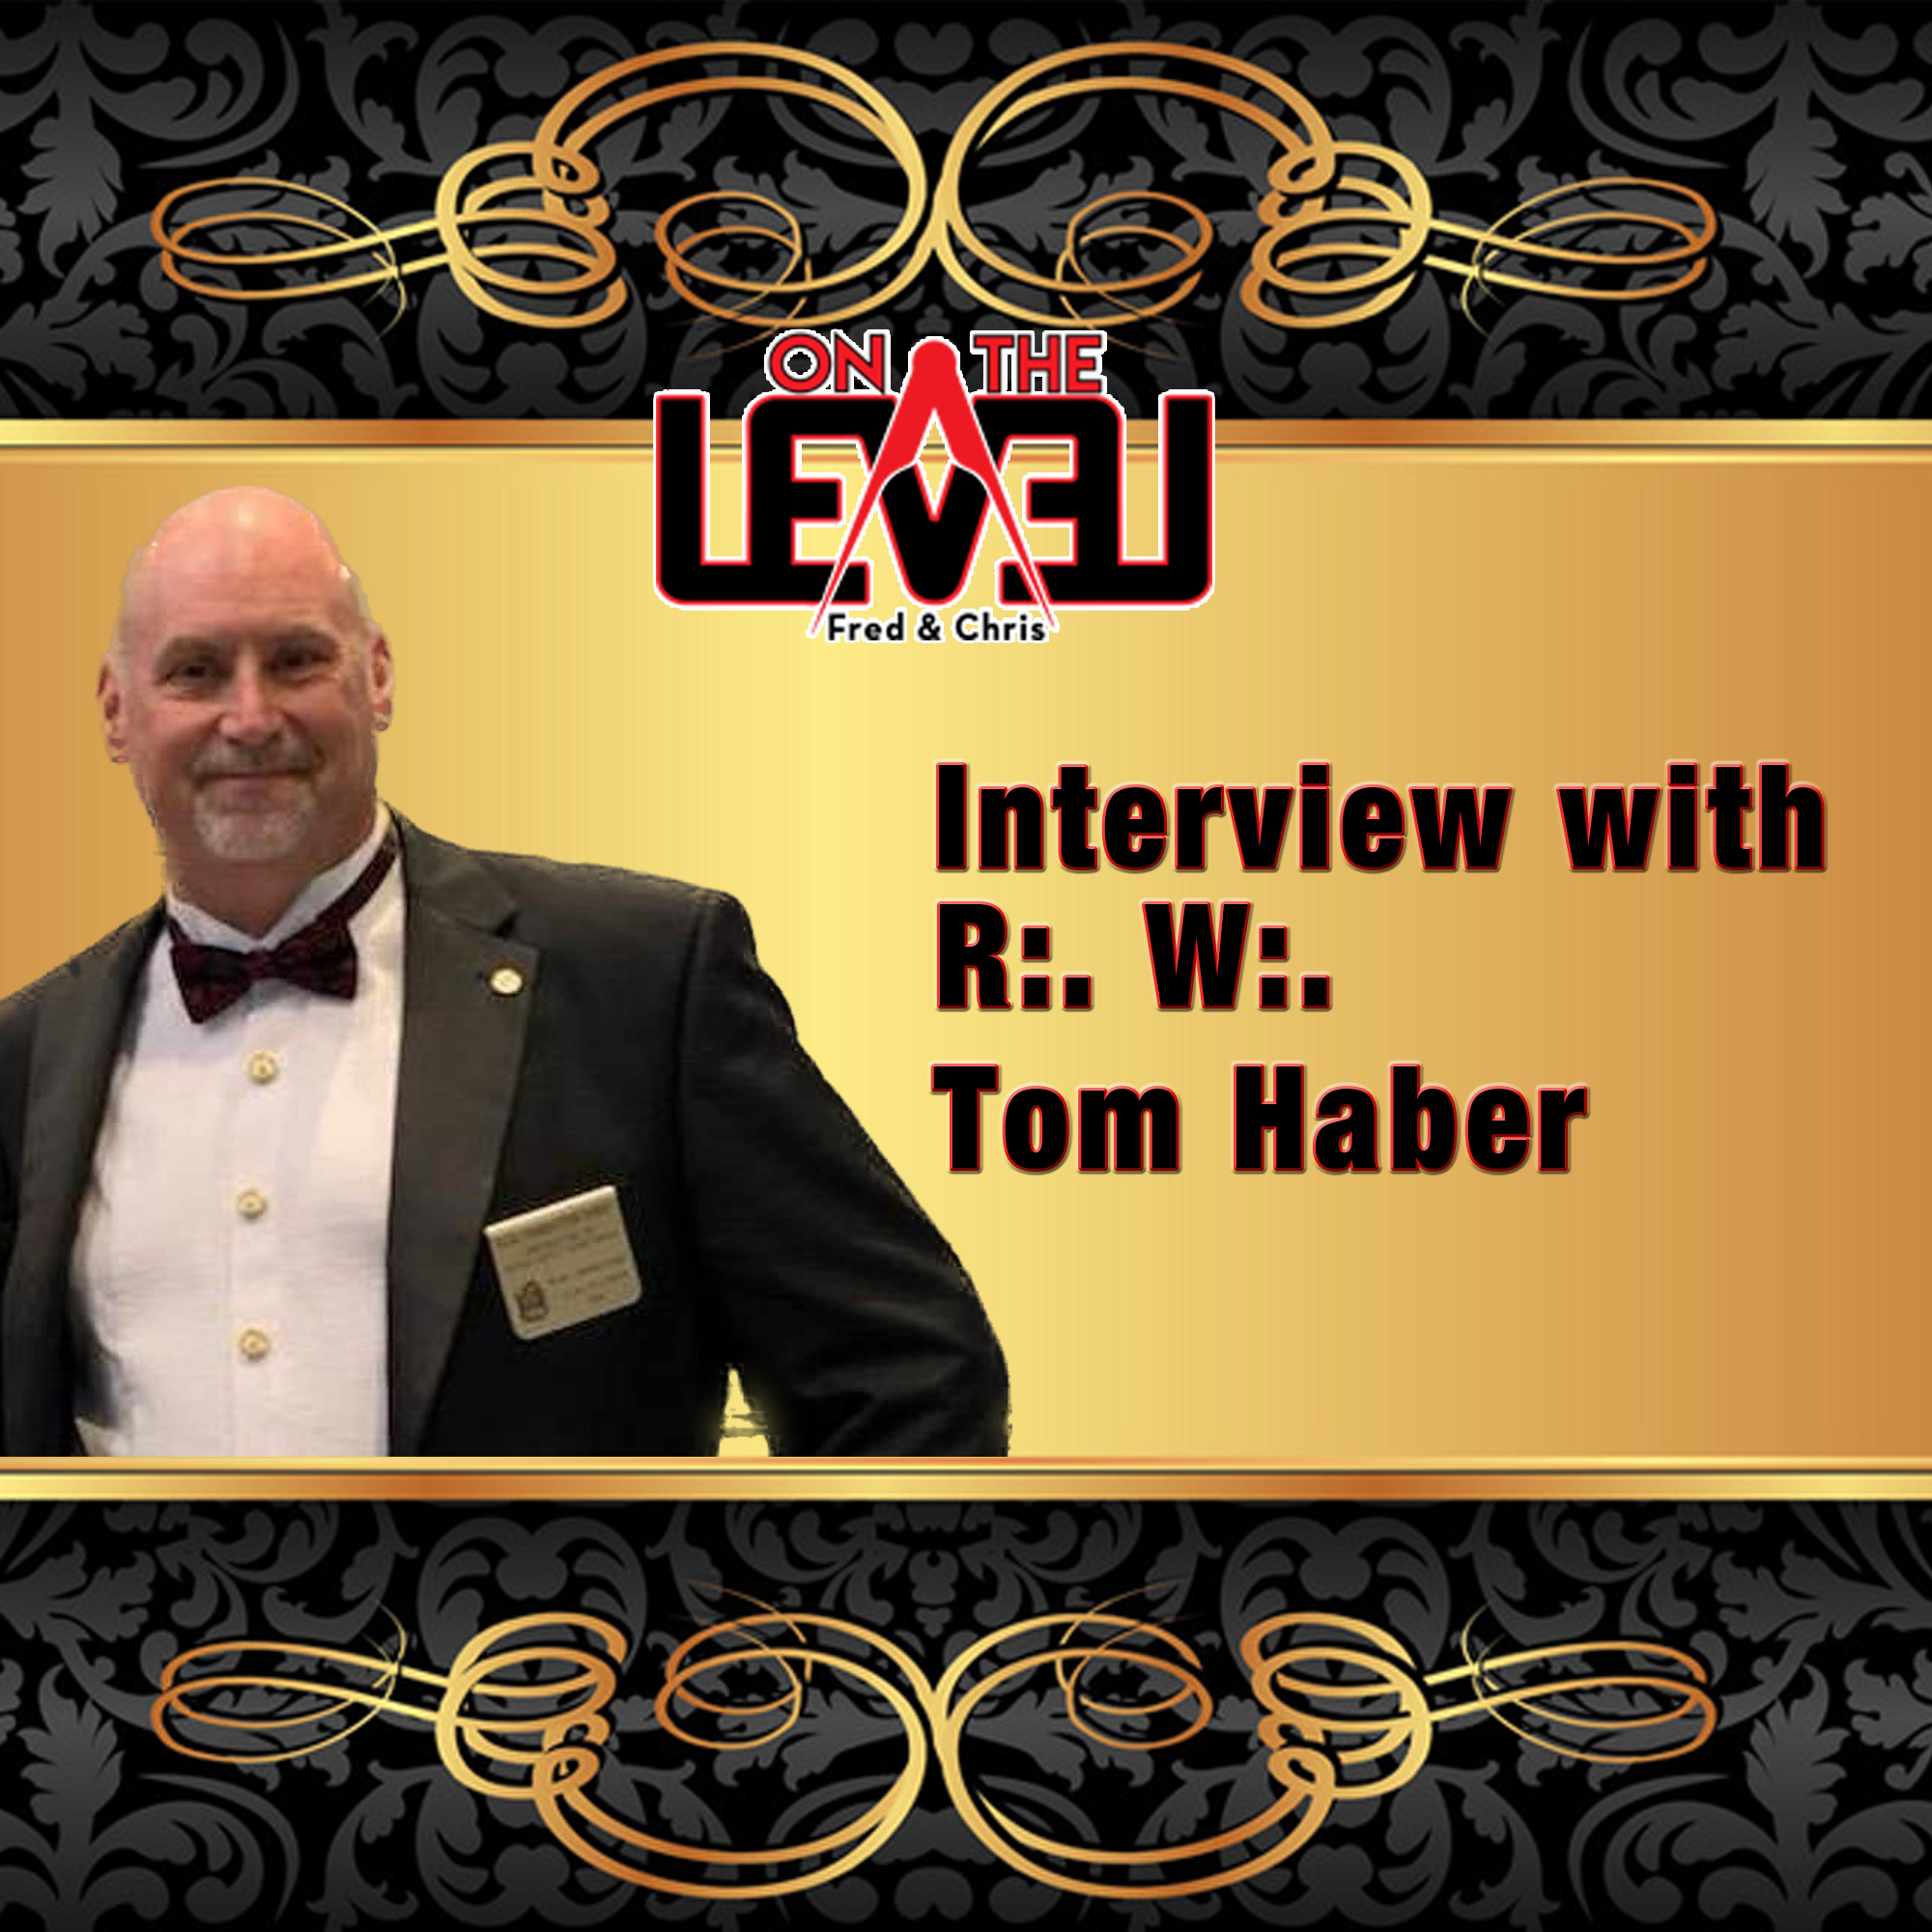 Season 2: Episode 11: The Values and Challenges of Masonry: A Conversation with R:. W:. Tom Haber